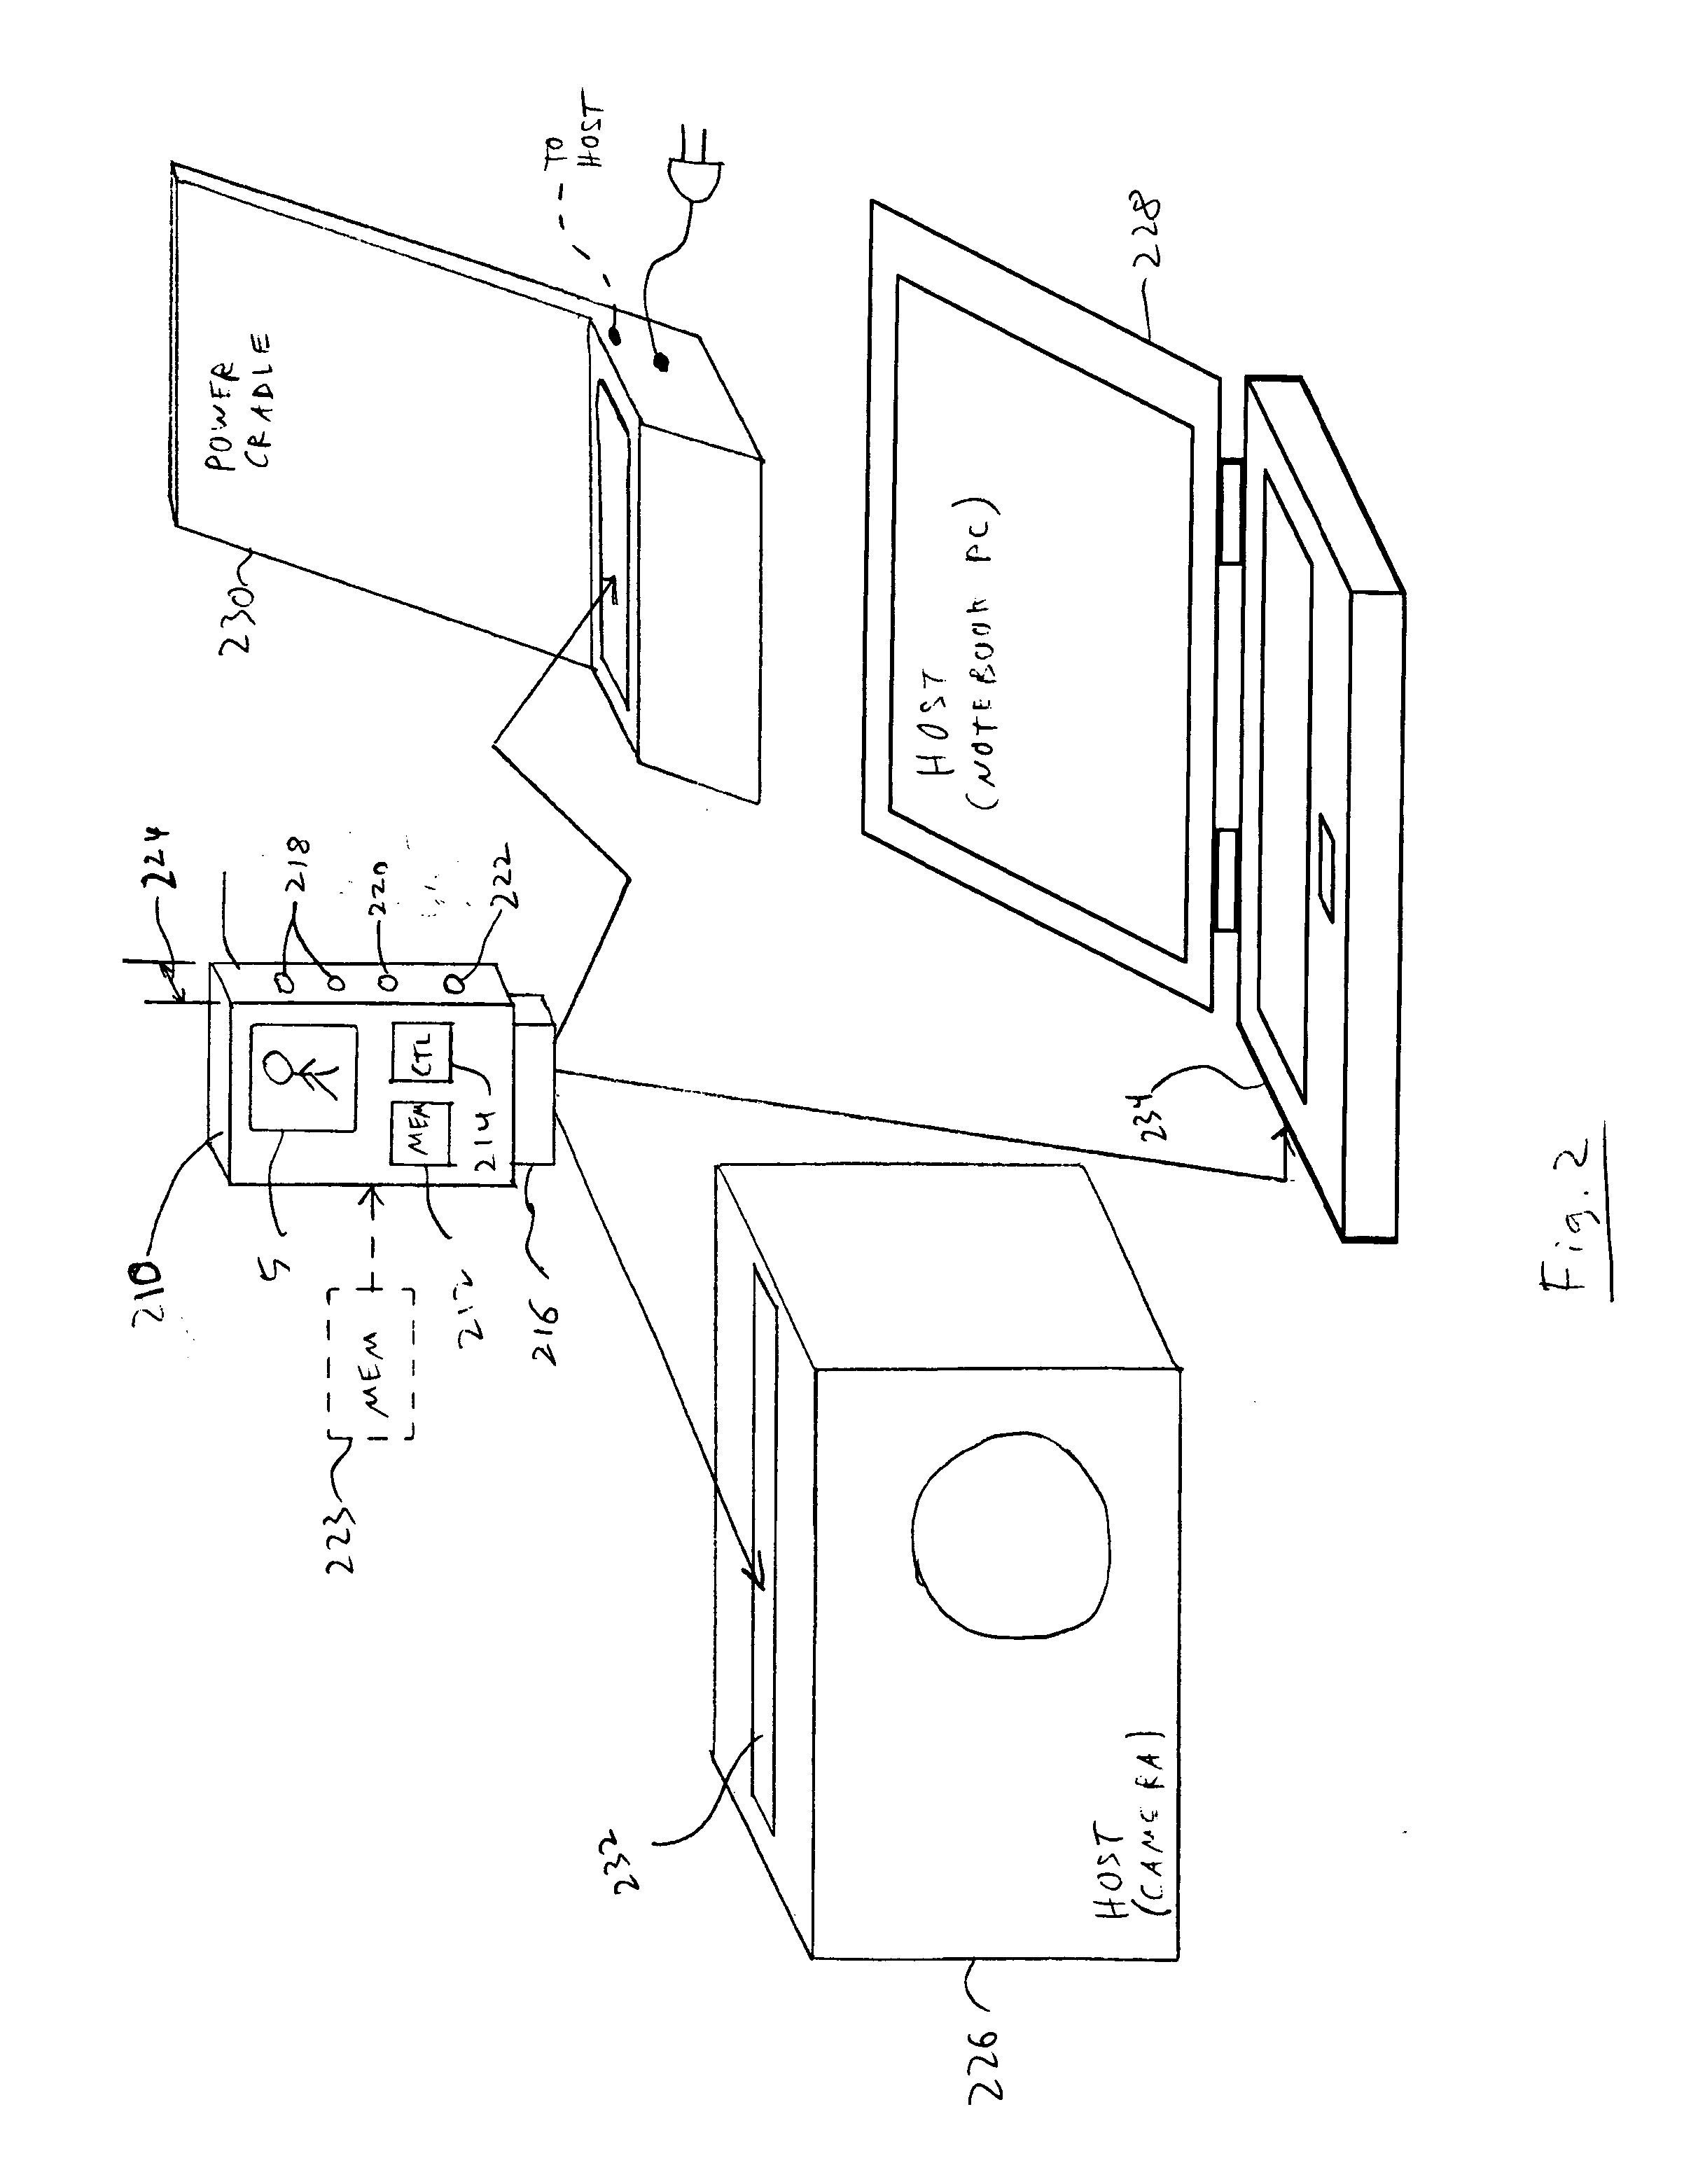 Intelligent portable memory device with display